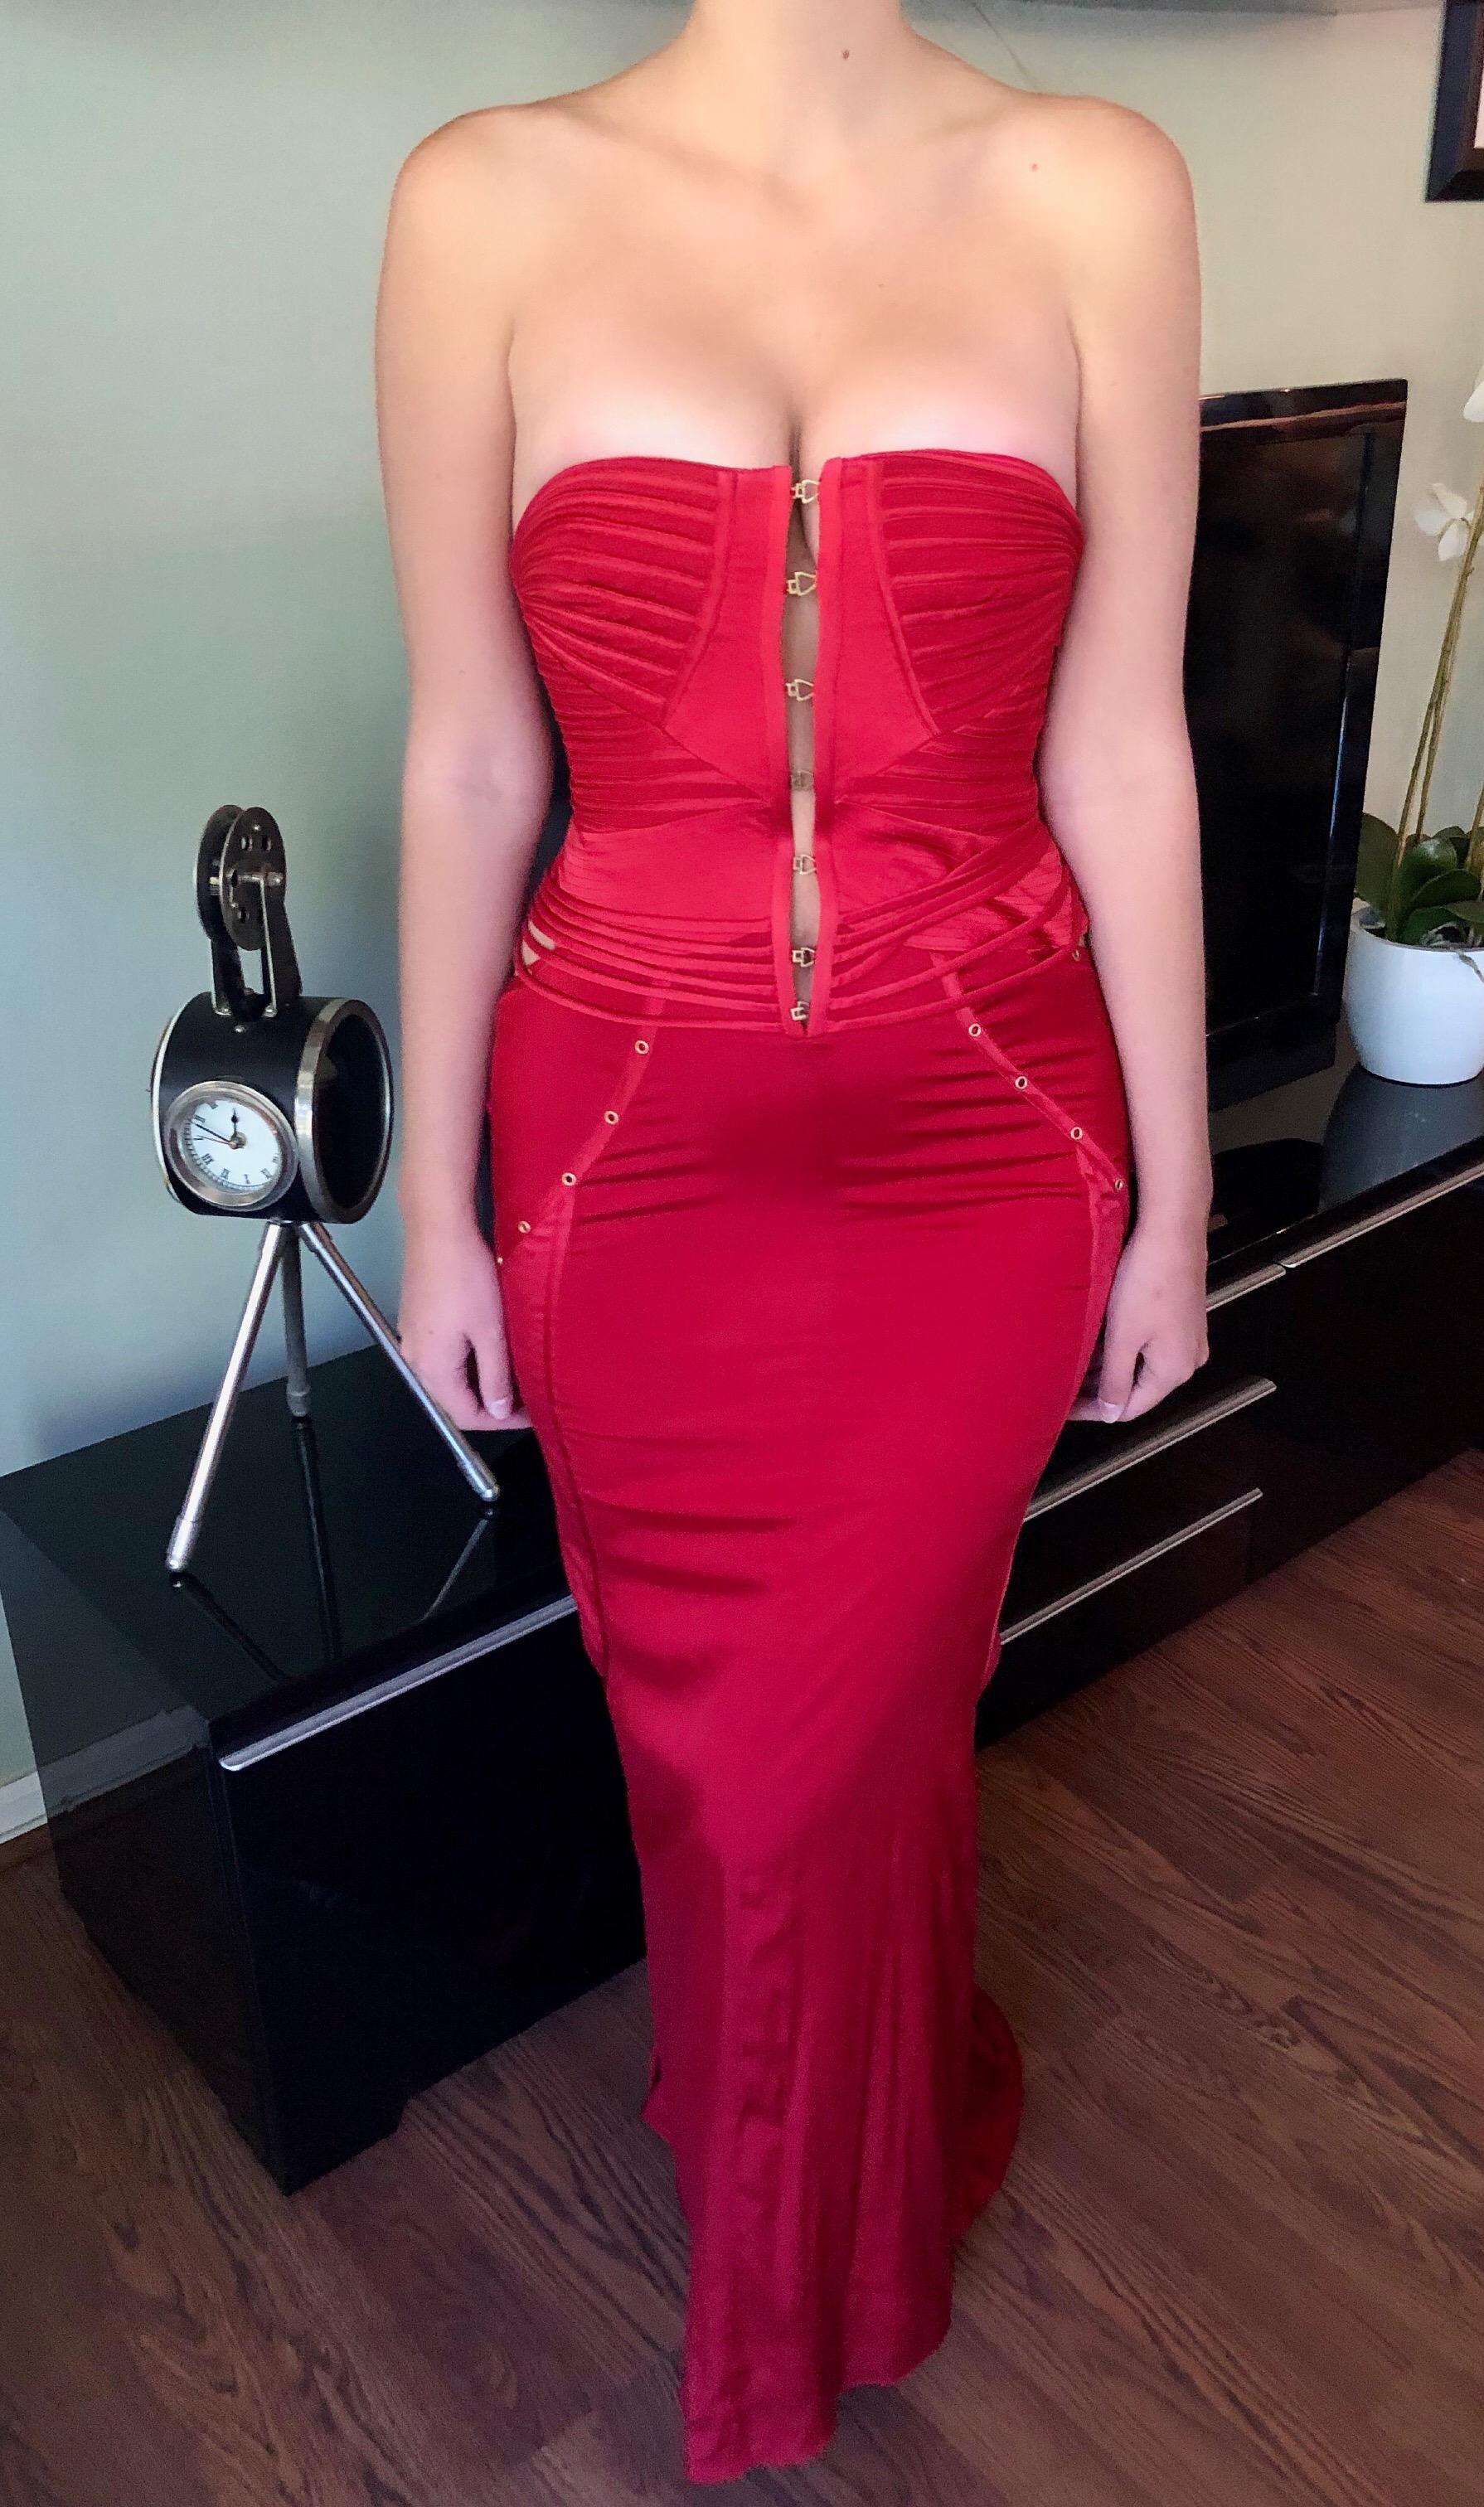 tom ford red dress